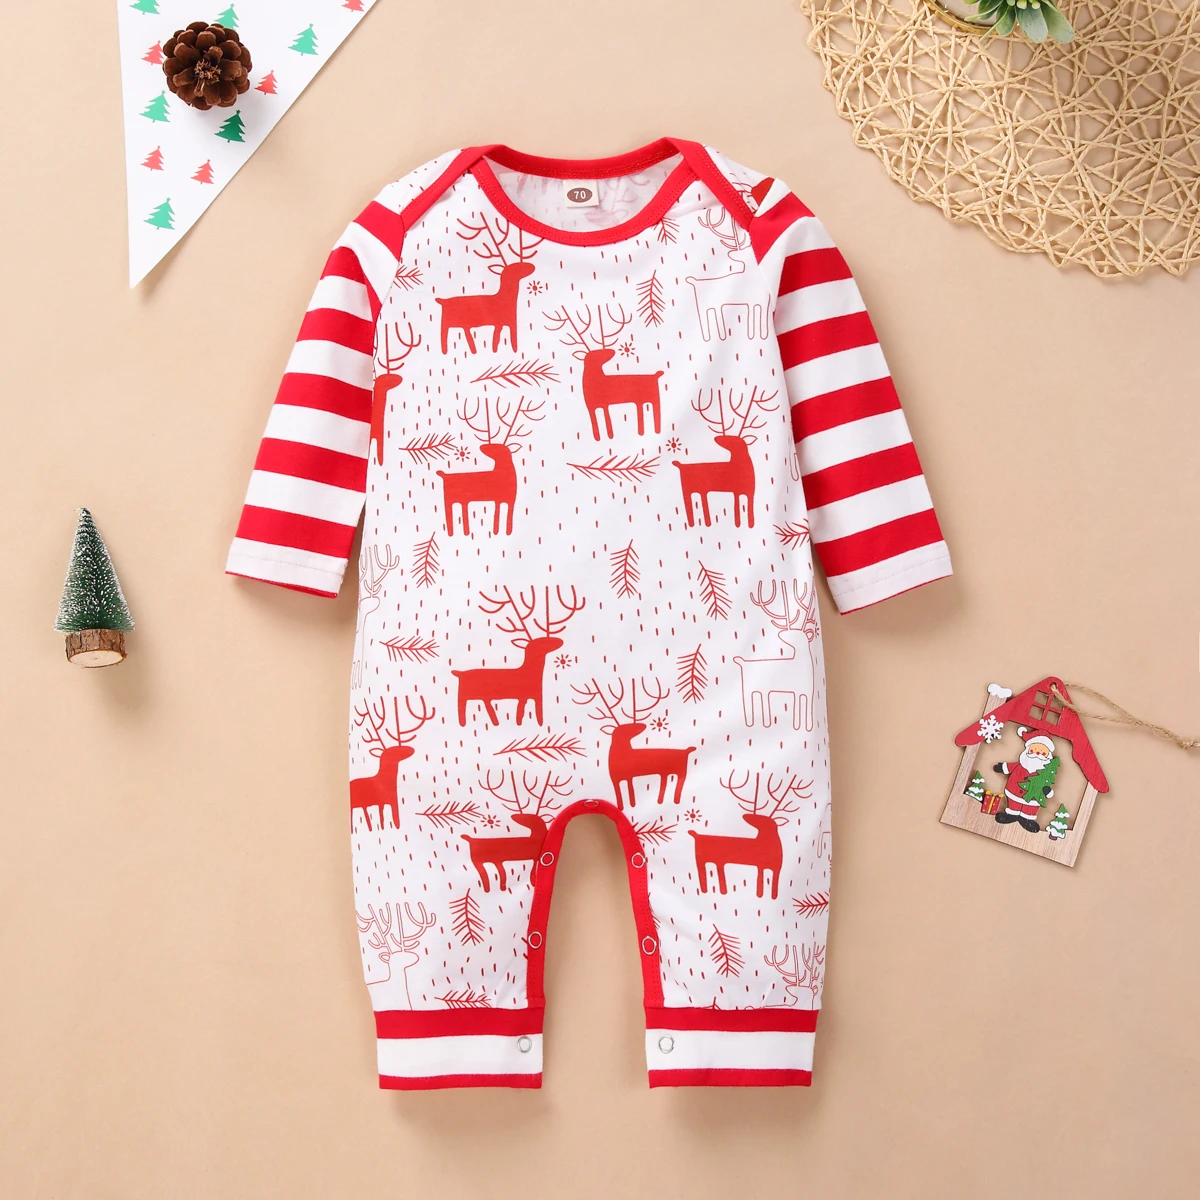 Christmas themed baby one-piece pants elk Christmas tree festive baby bodysuits suitable for 0-18 months old baby boys and girls